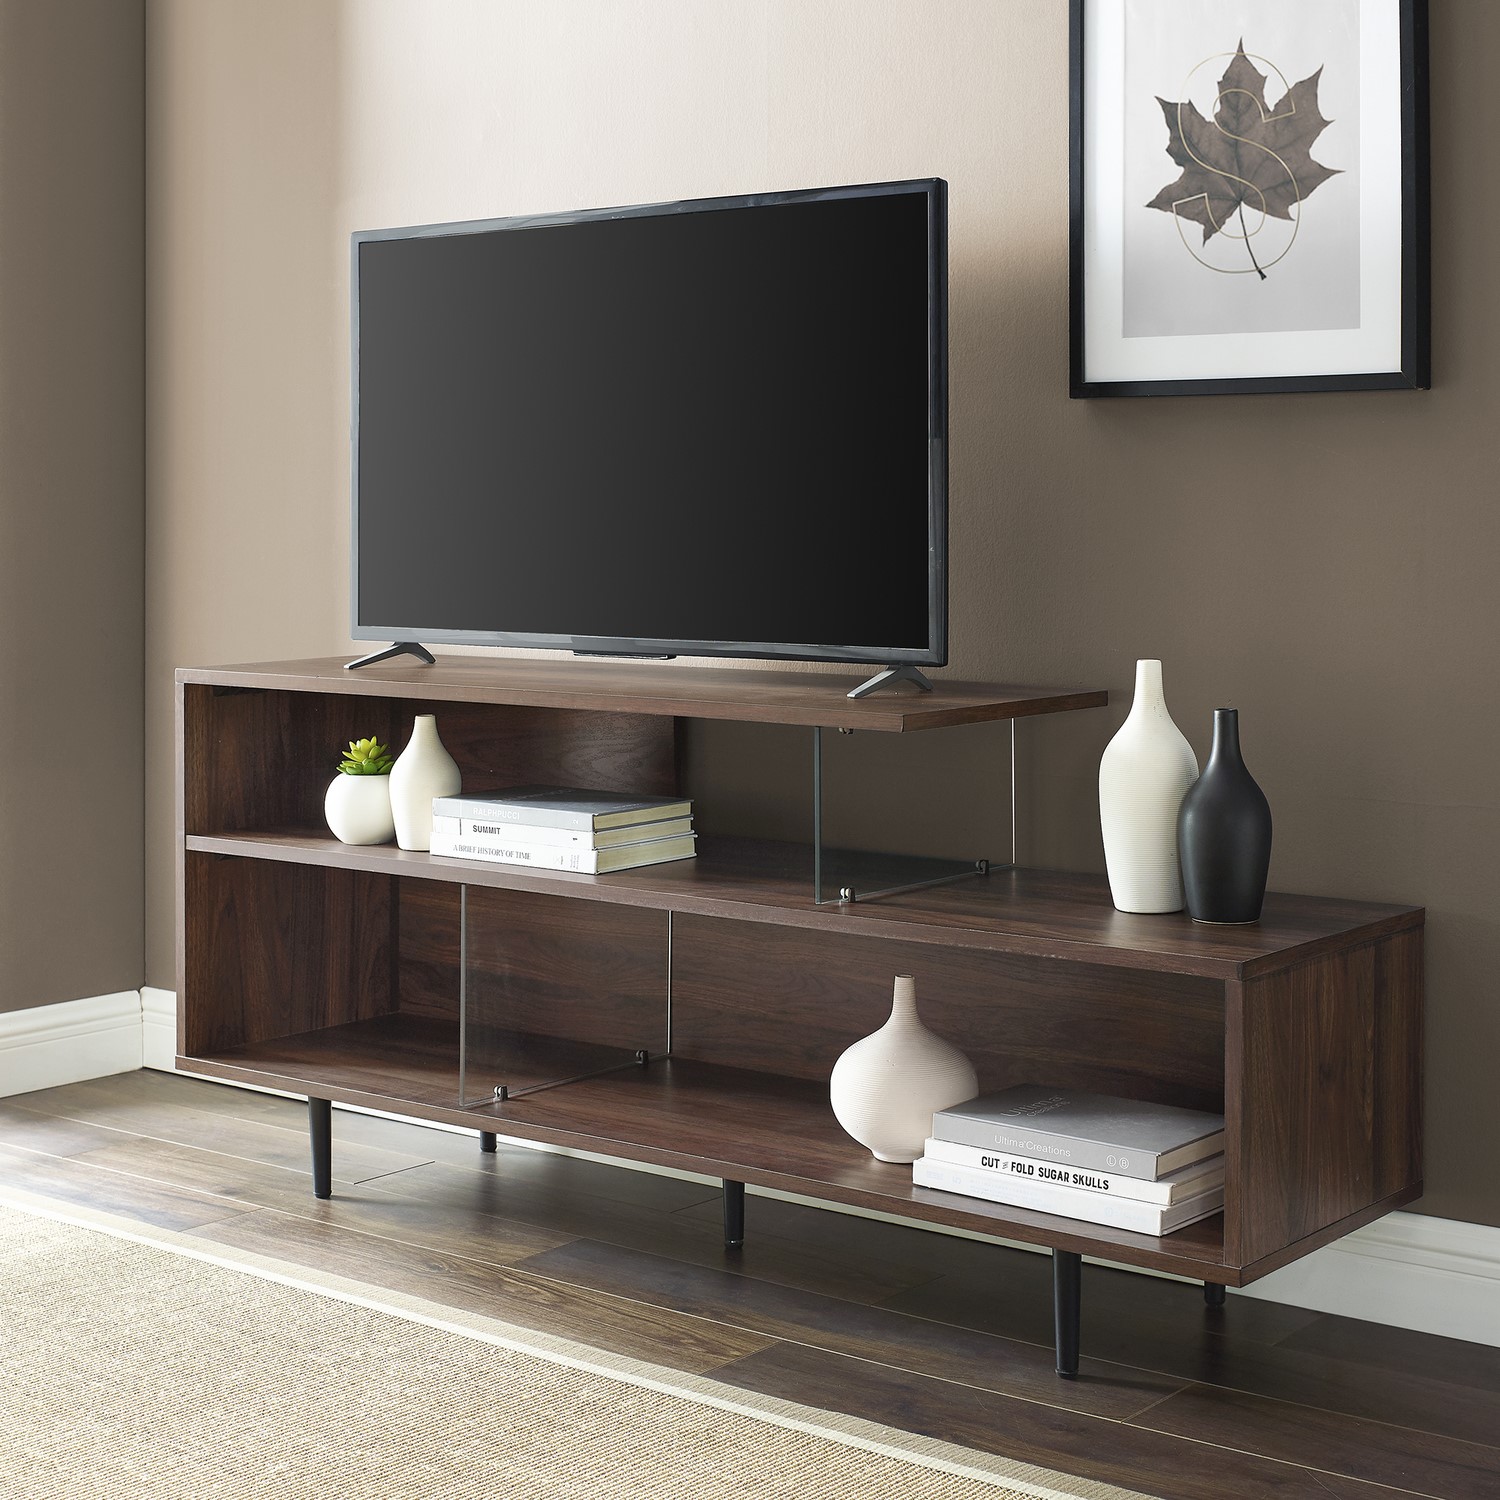 Walnut Effect Open TV Stand with Glass Panels - TVs up to 66 - Foster